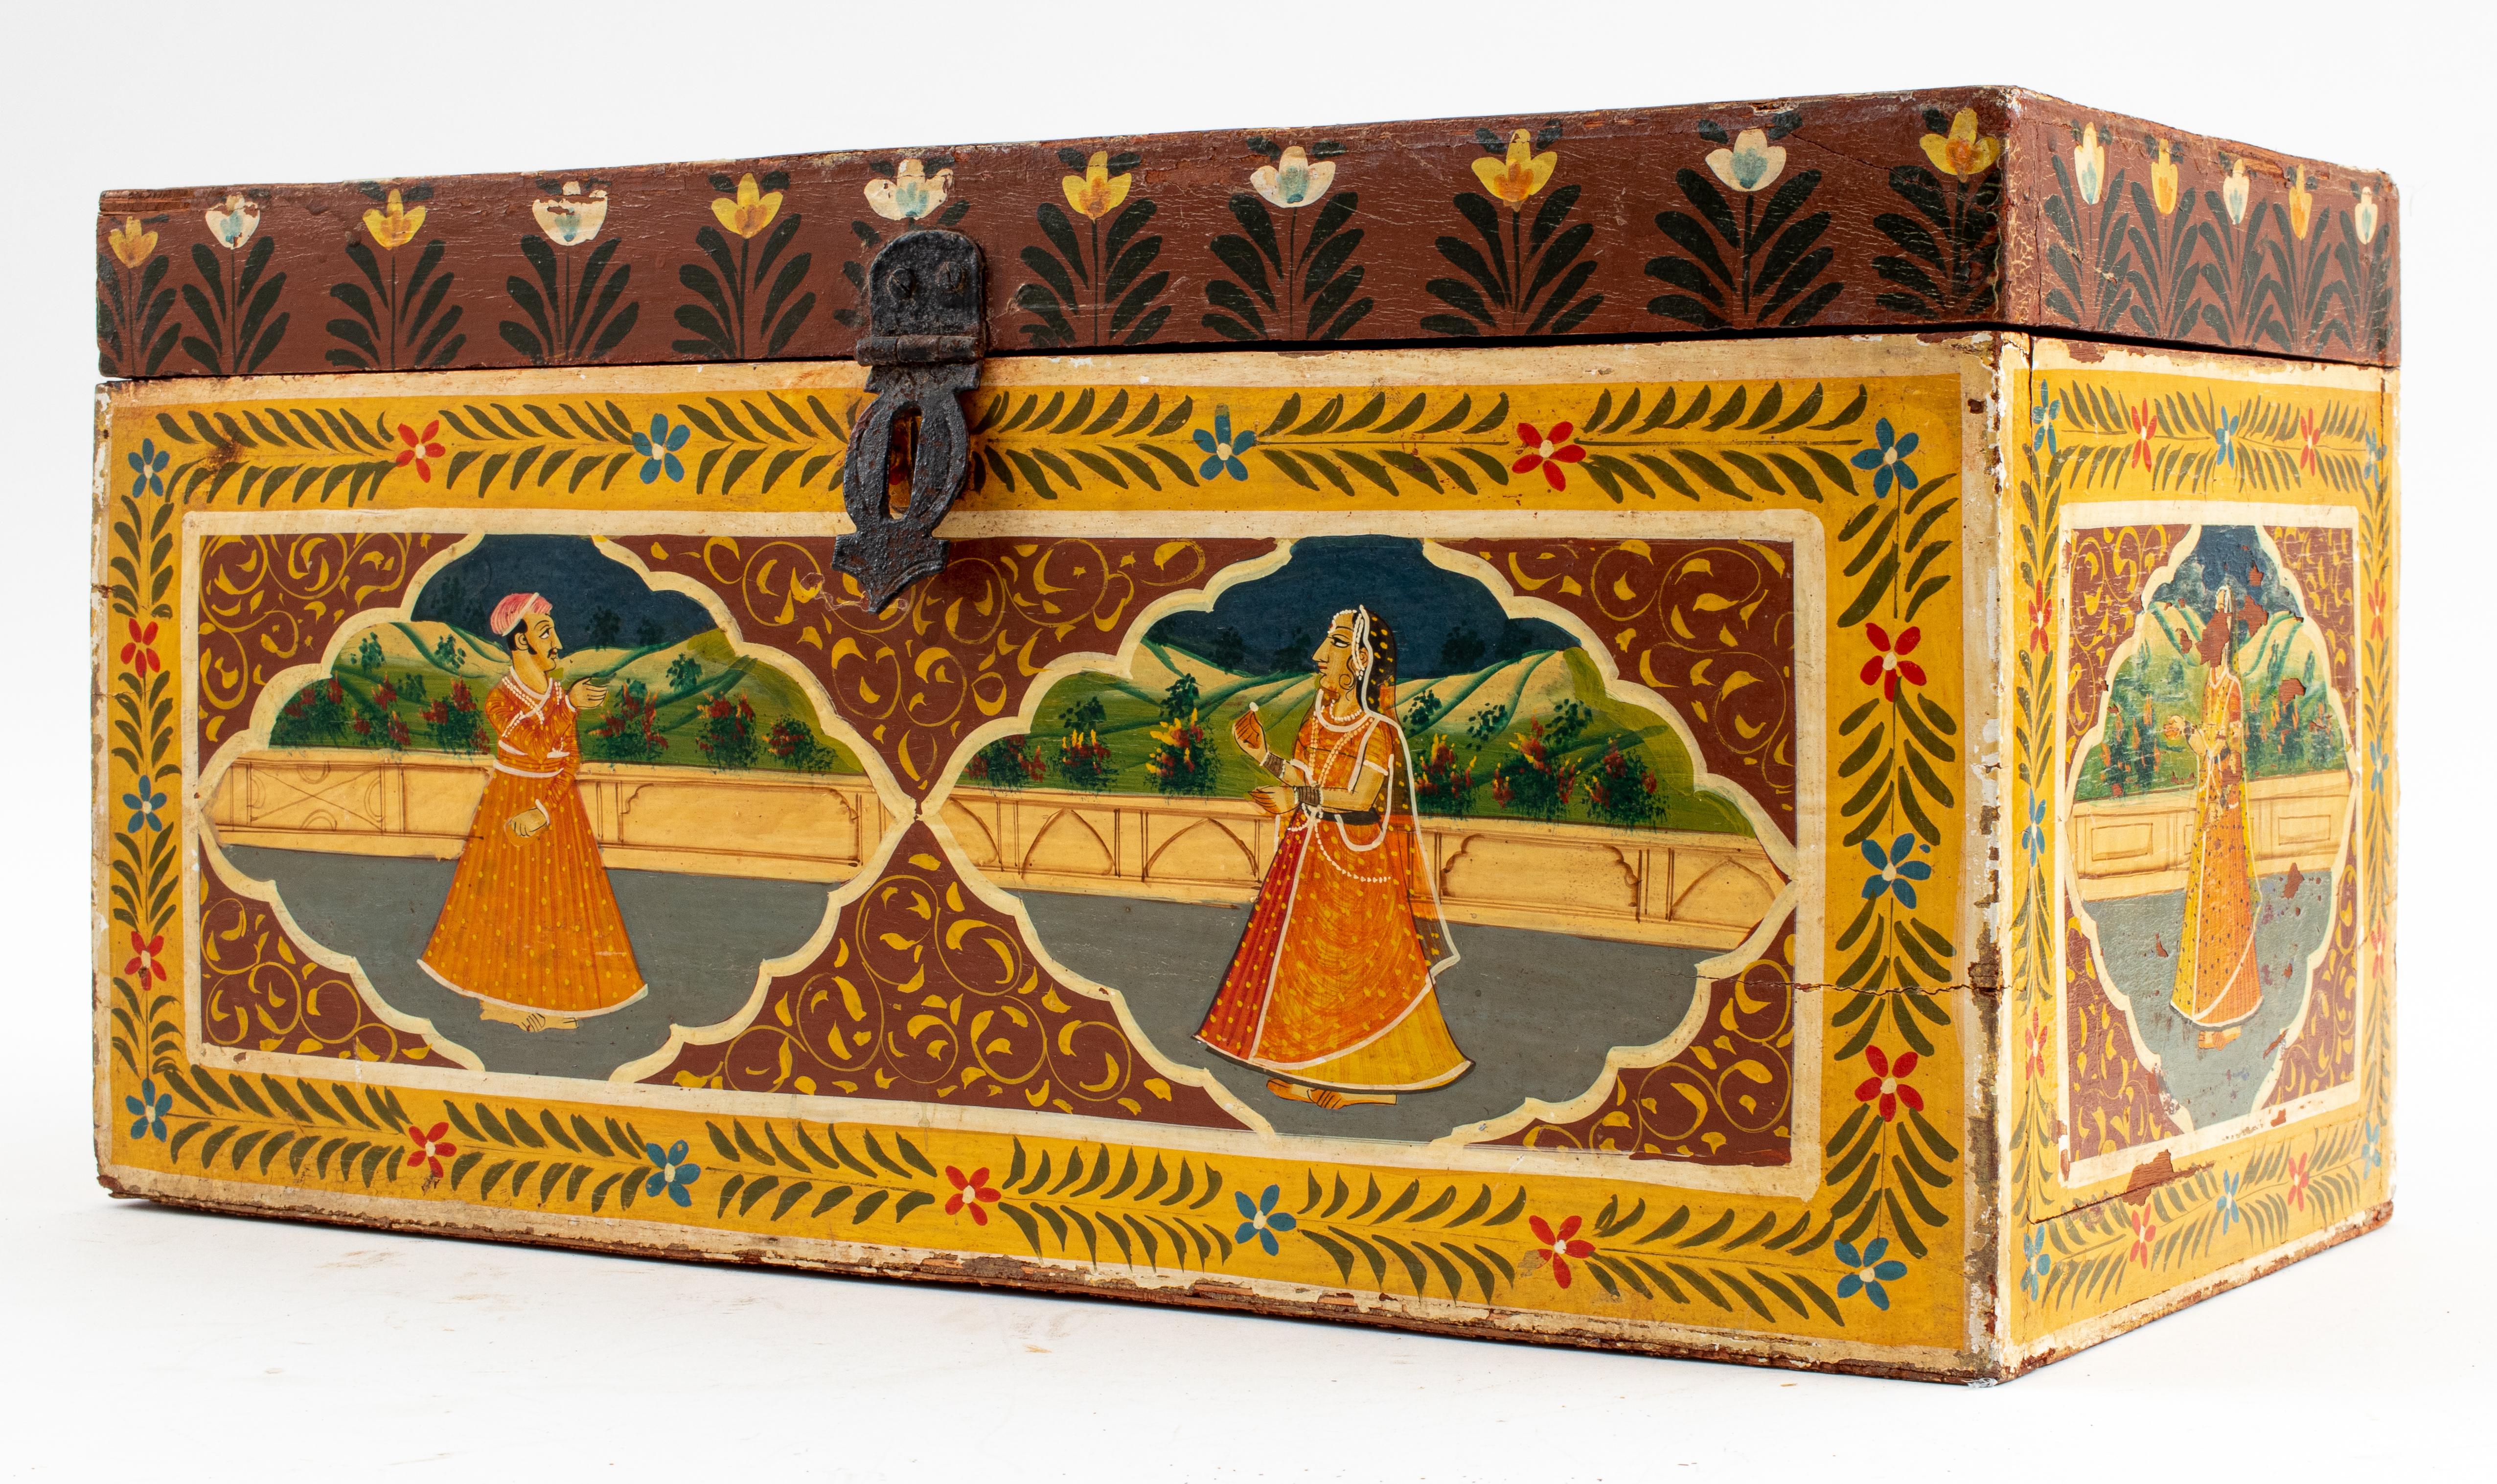 Indian hand-painted wooden chest with scene of courtship.
Measures: 8.75